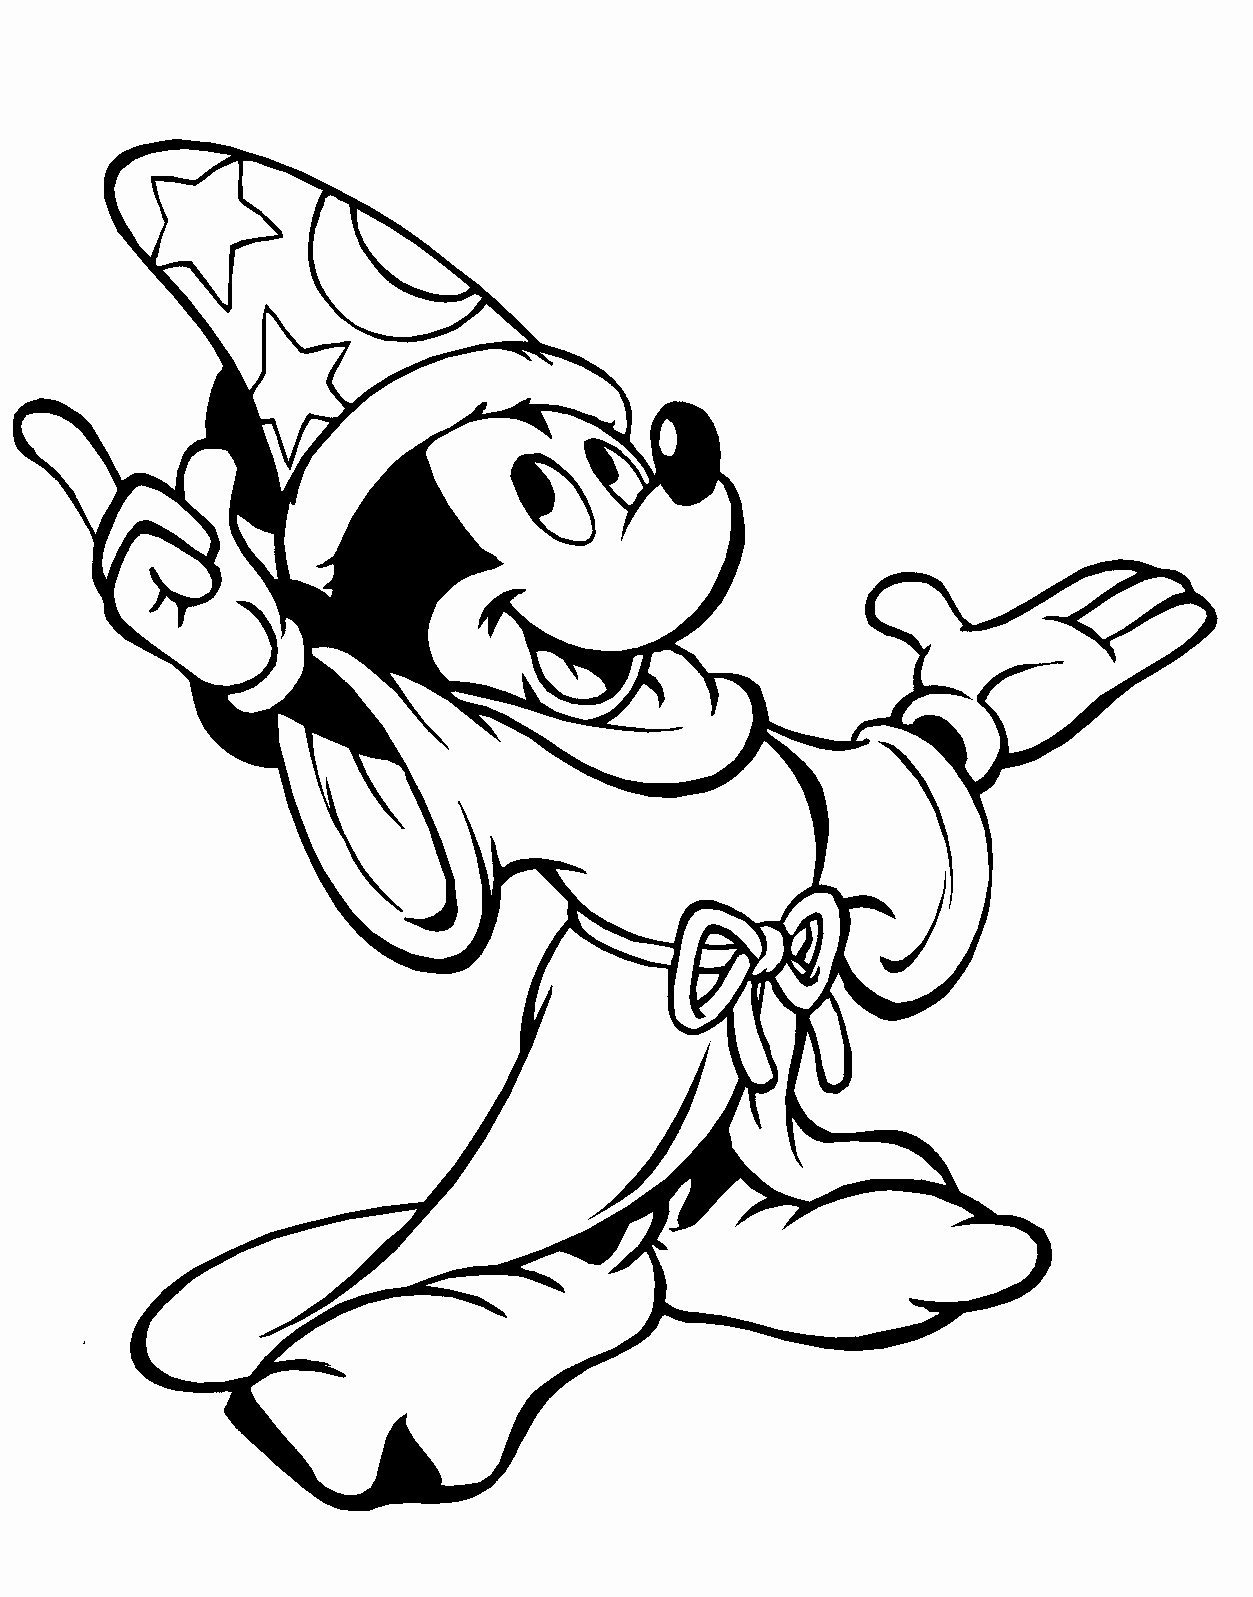 Mickey Mouse Colouring Sheets Inspirational Free Printable Mickey Mouse Coloring Pages for Kids